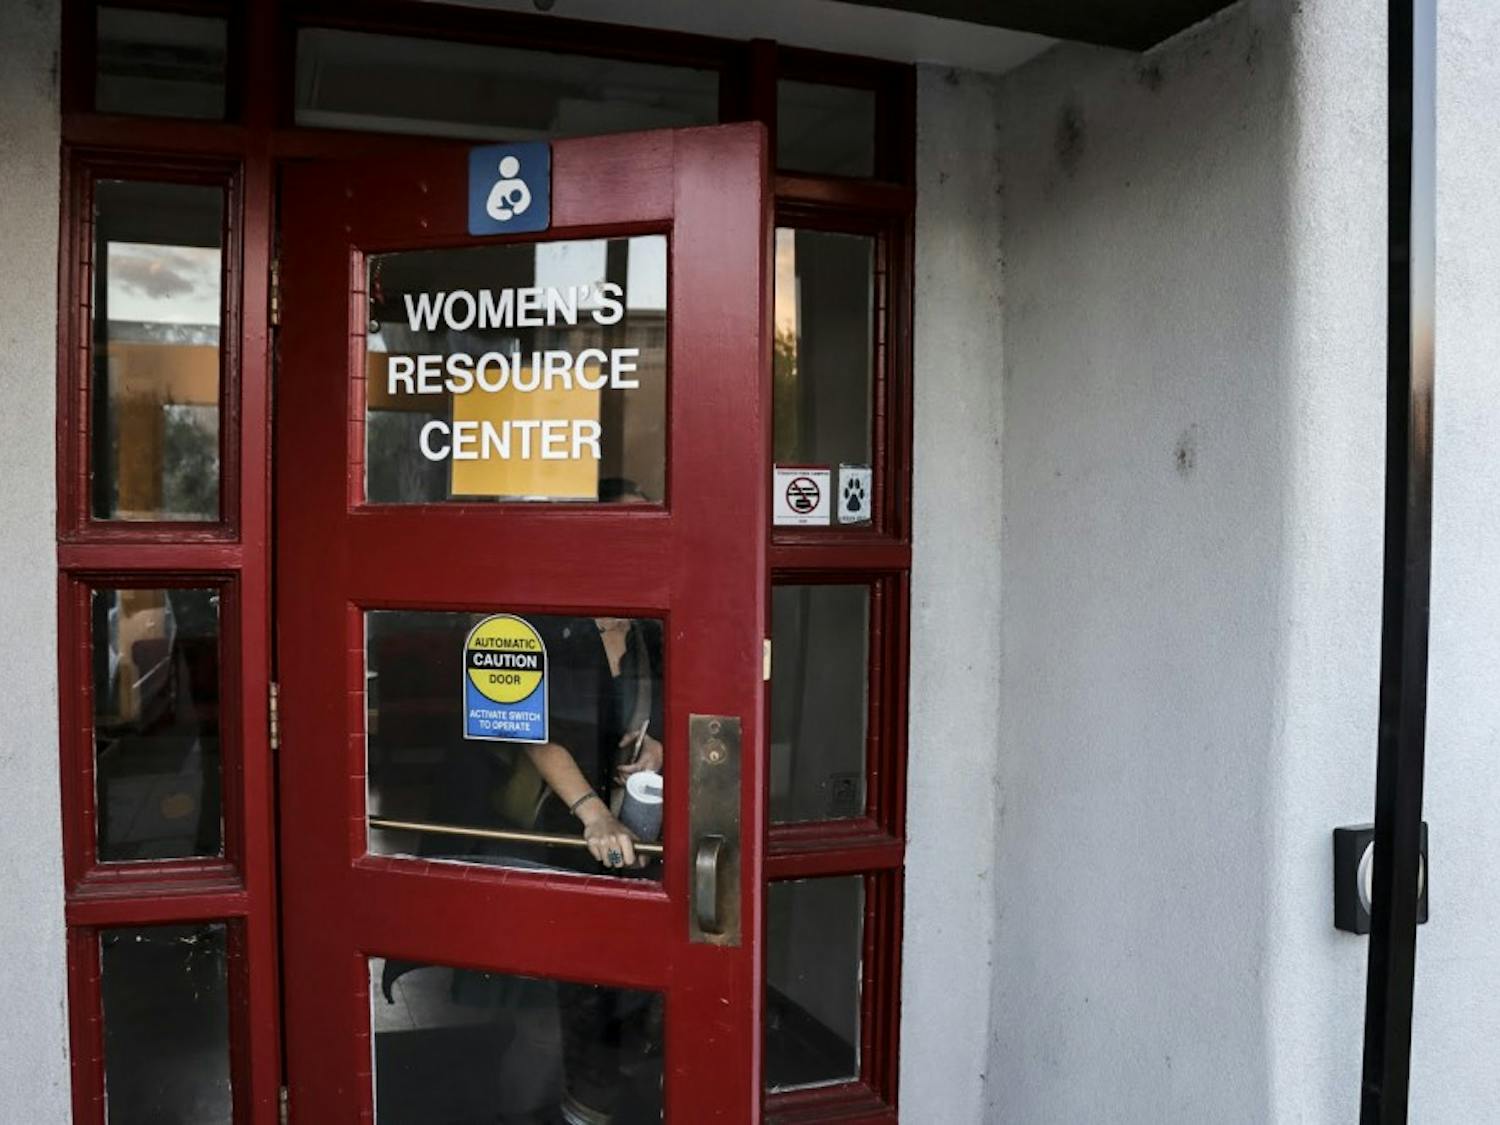 A woman walks out of the Women's Resource Center on the evening of Oct. 24, 2018.